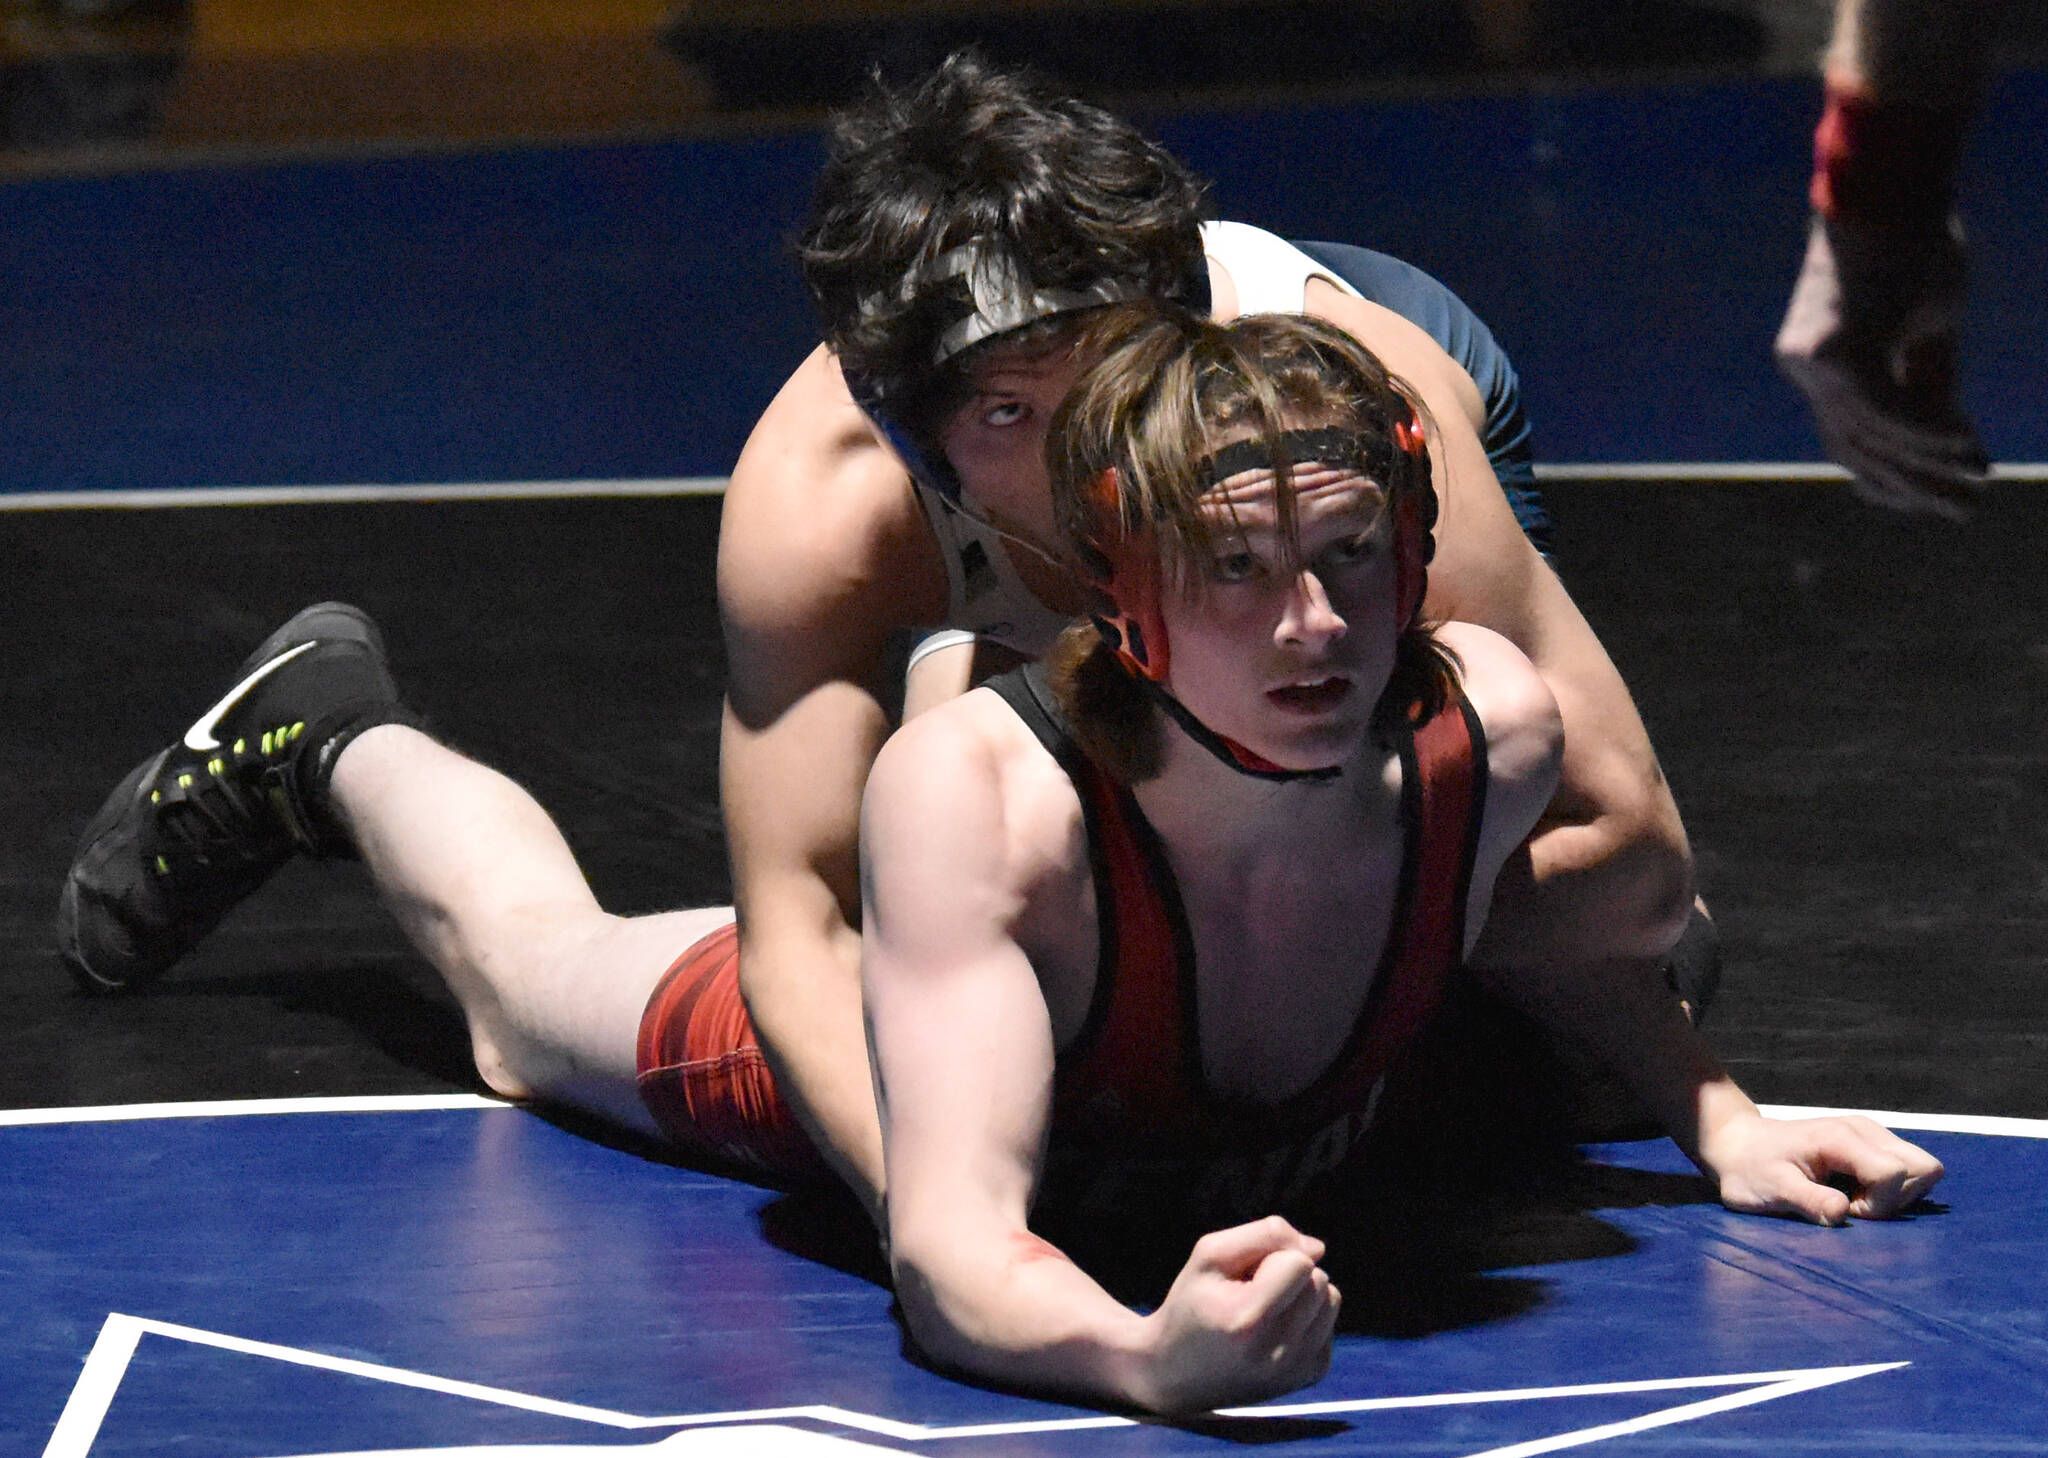 Soldotna’s Isaac Chavarria works to a pin of Kenai Central’s Cameron Cook at 152 pounds Tuesday, Nov. 1, 2022, at Soldotna High School in Soldotna, Alaska. (Photo by Jeff Helminiak/Peninsula Clarion)